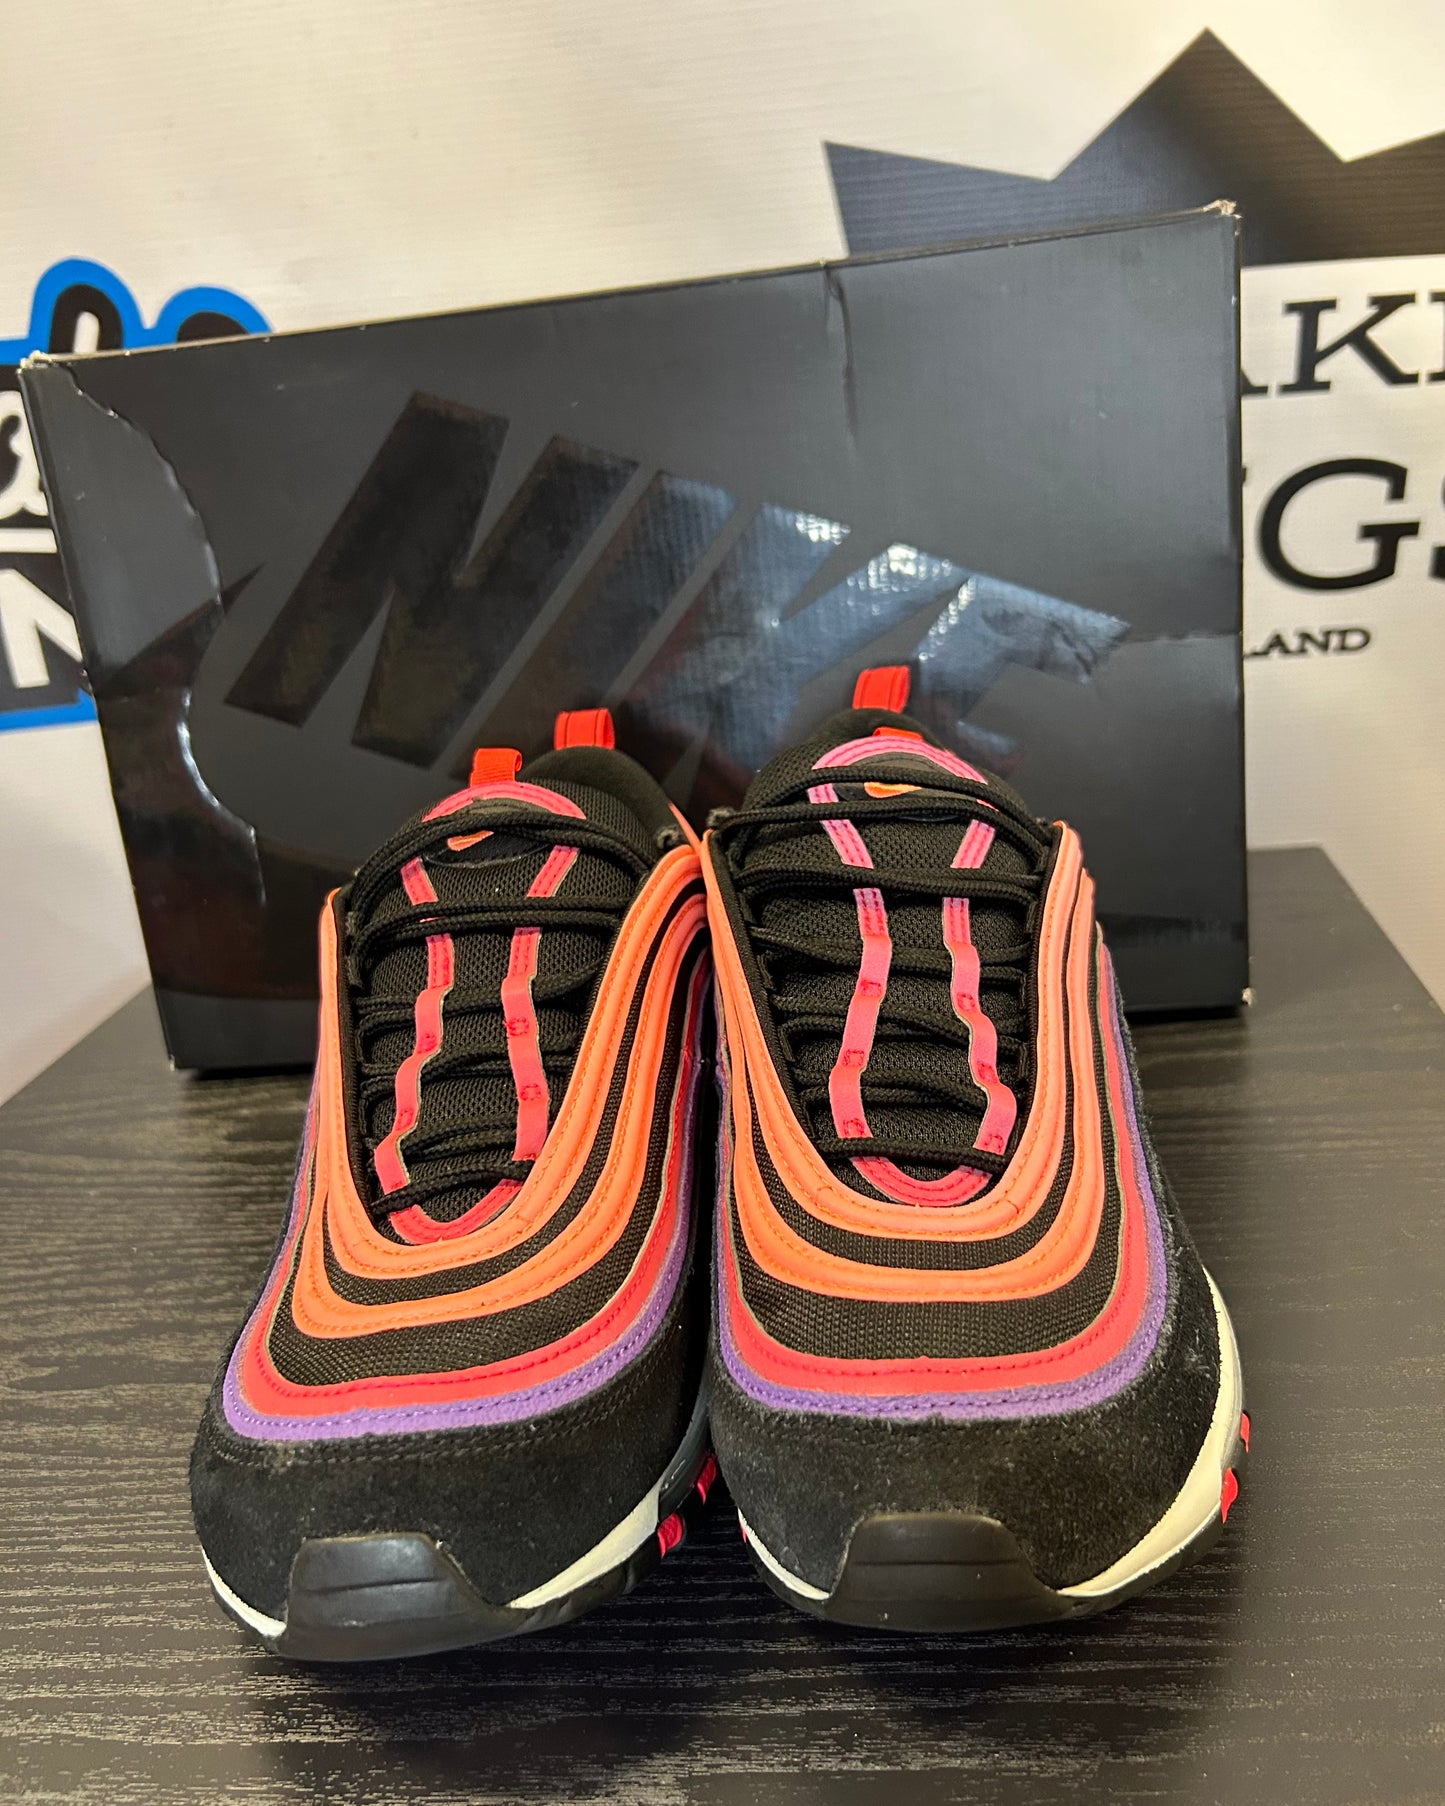 Nike Air Max 97 Sunset (Pre-Owned)